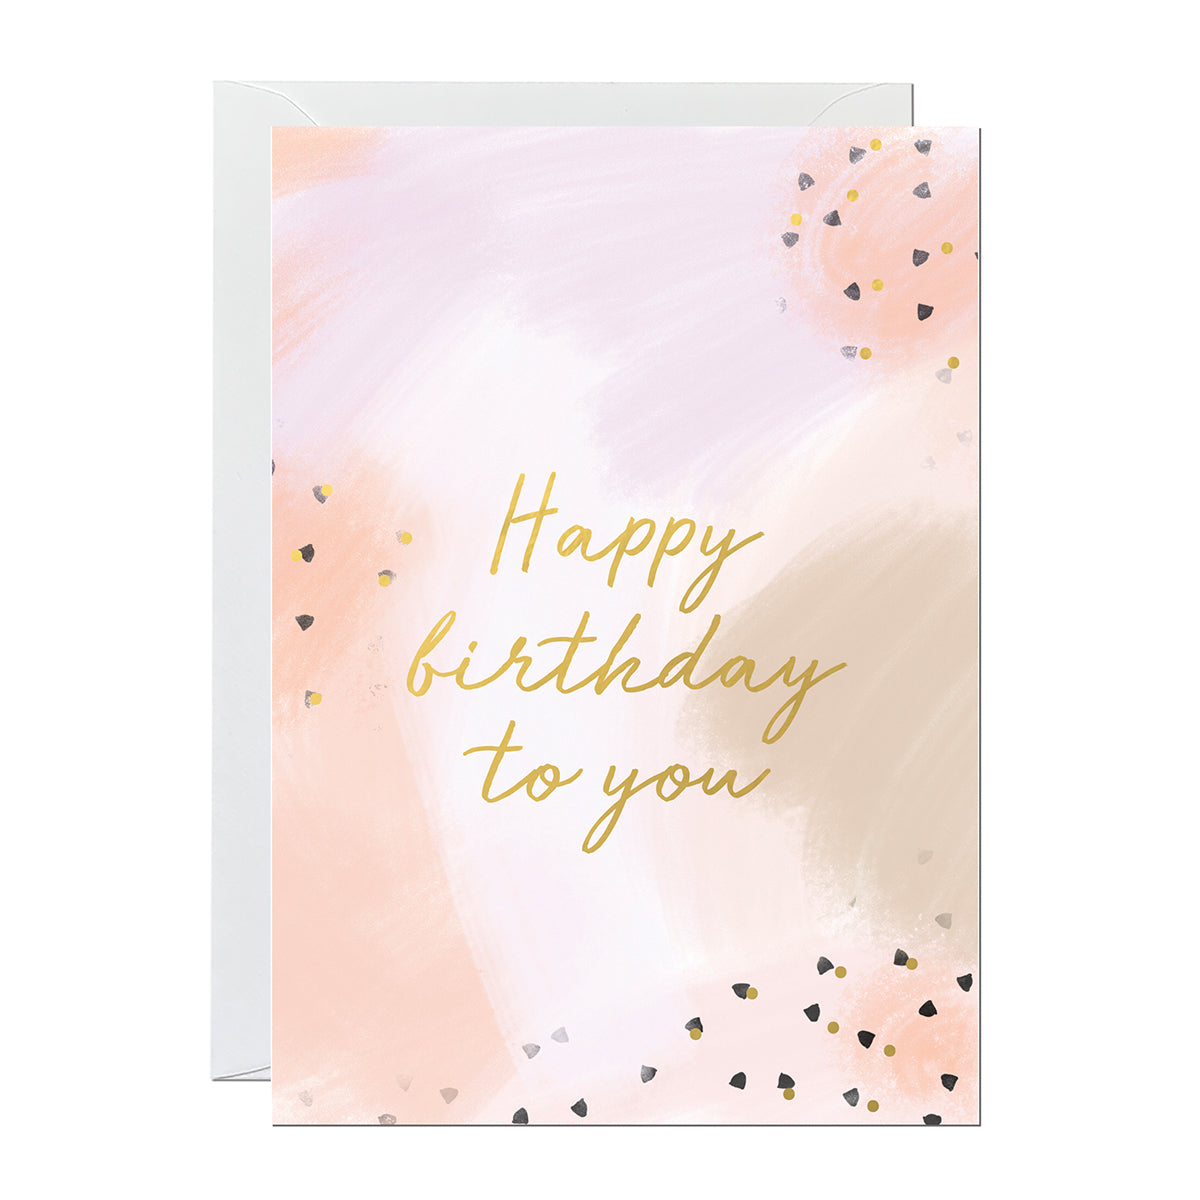 Ricicle Cards - Happy Birthday To You Card